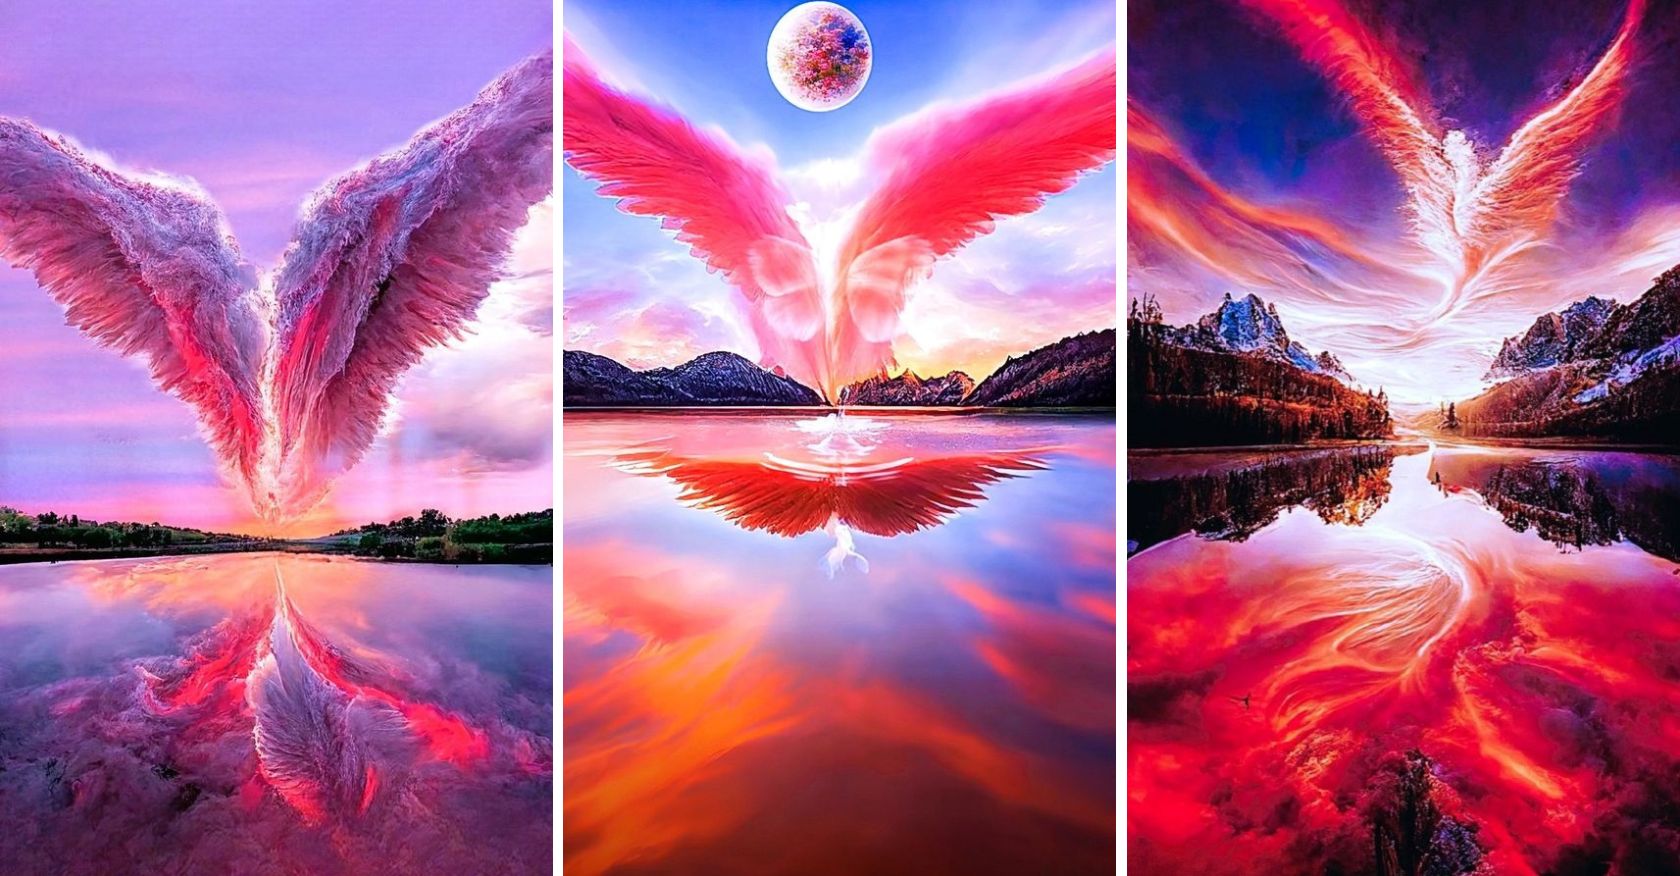 The painting showcasing a blend of red and orange hues in the sky, along with wings spread, generates a stunning sight.